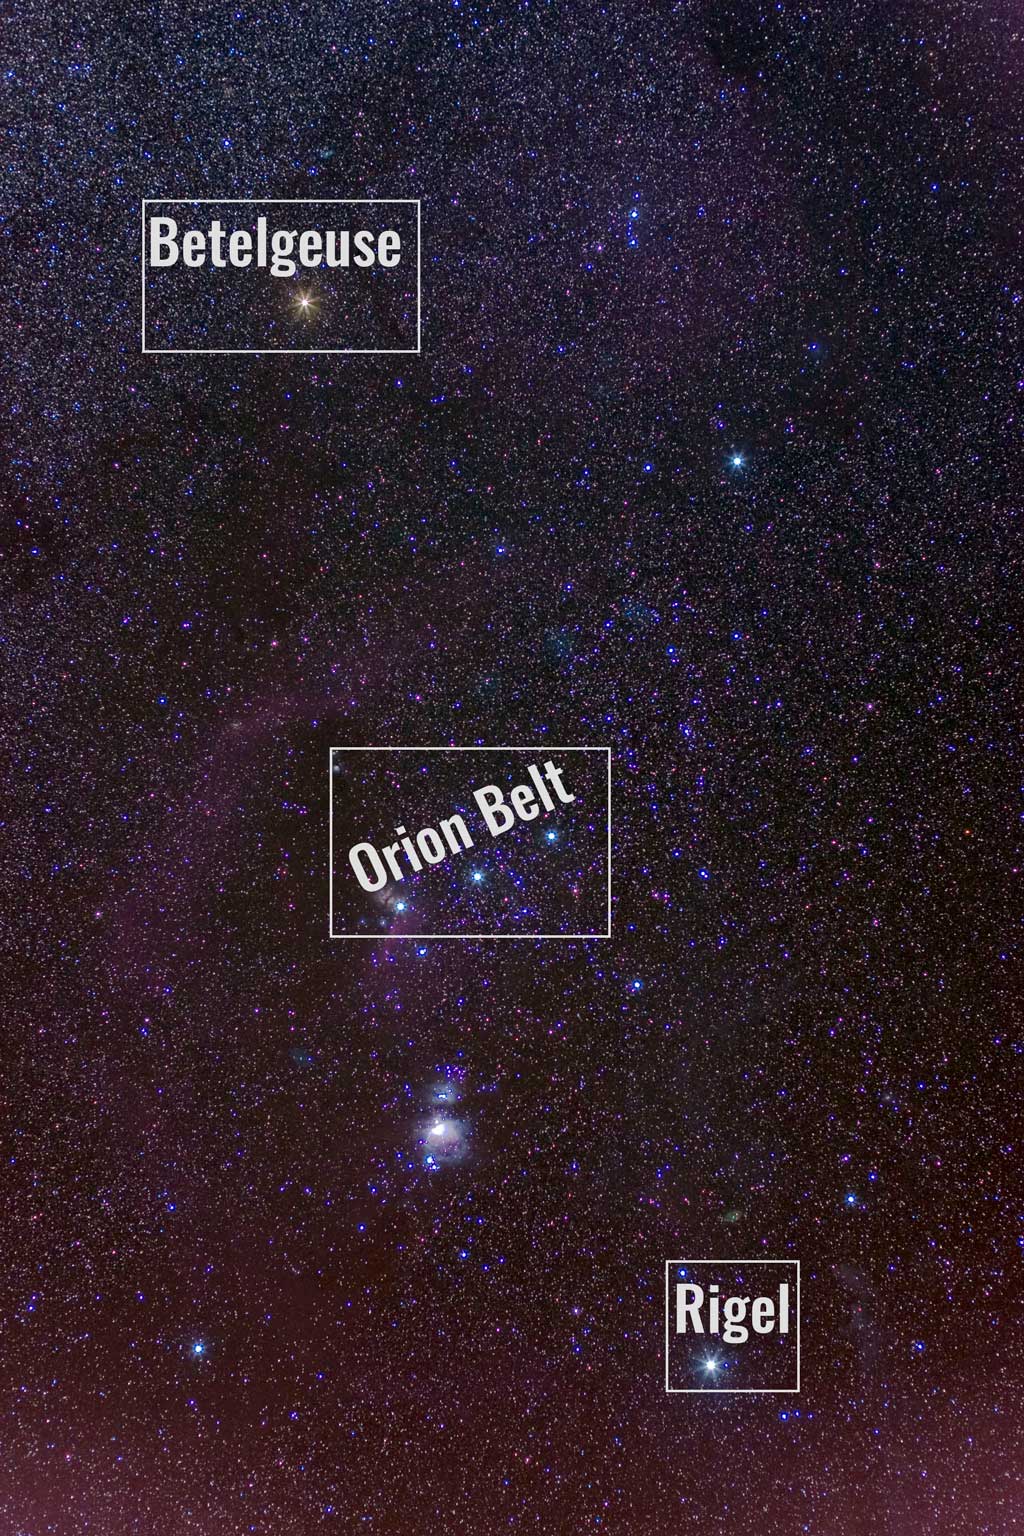 The constellation Orion. Deep sky objects visible in this image include the Orion Belt Stars, Betelgeuse, and Rigel.